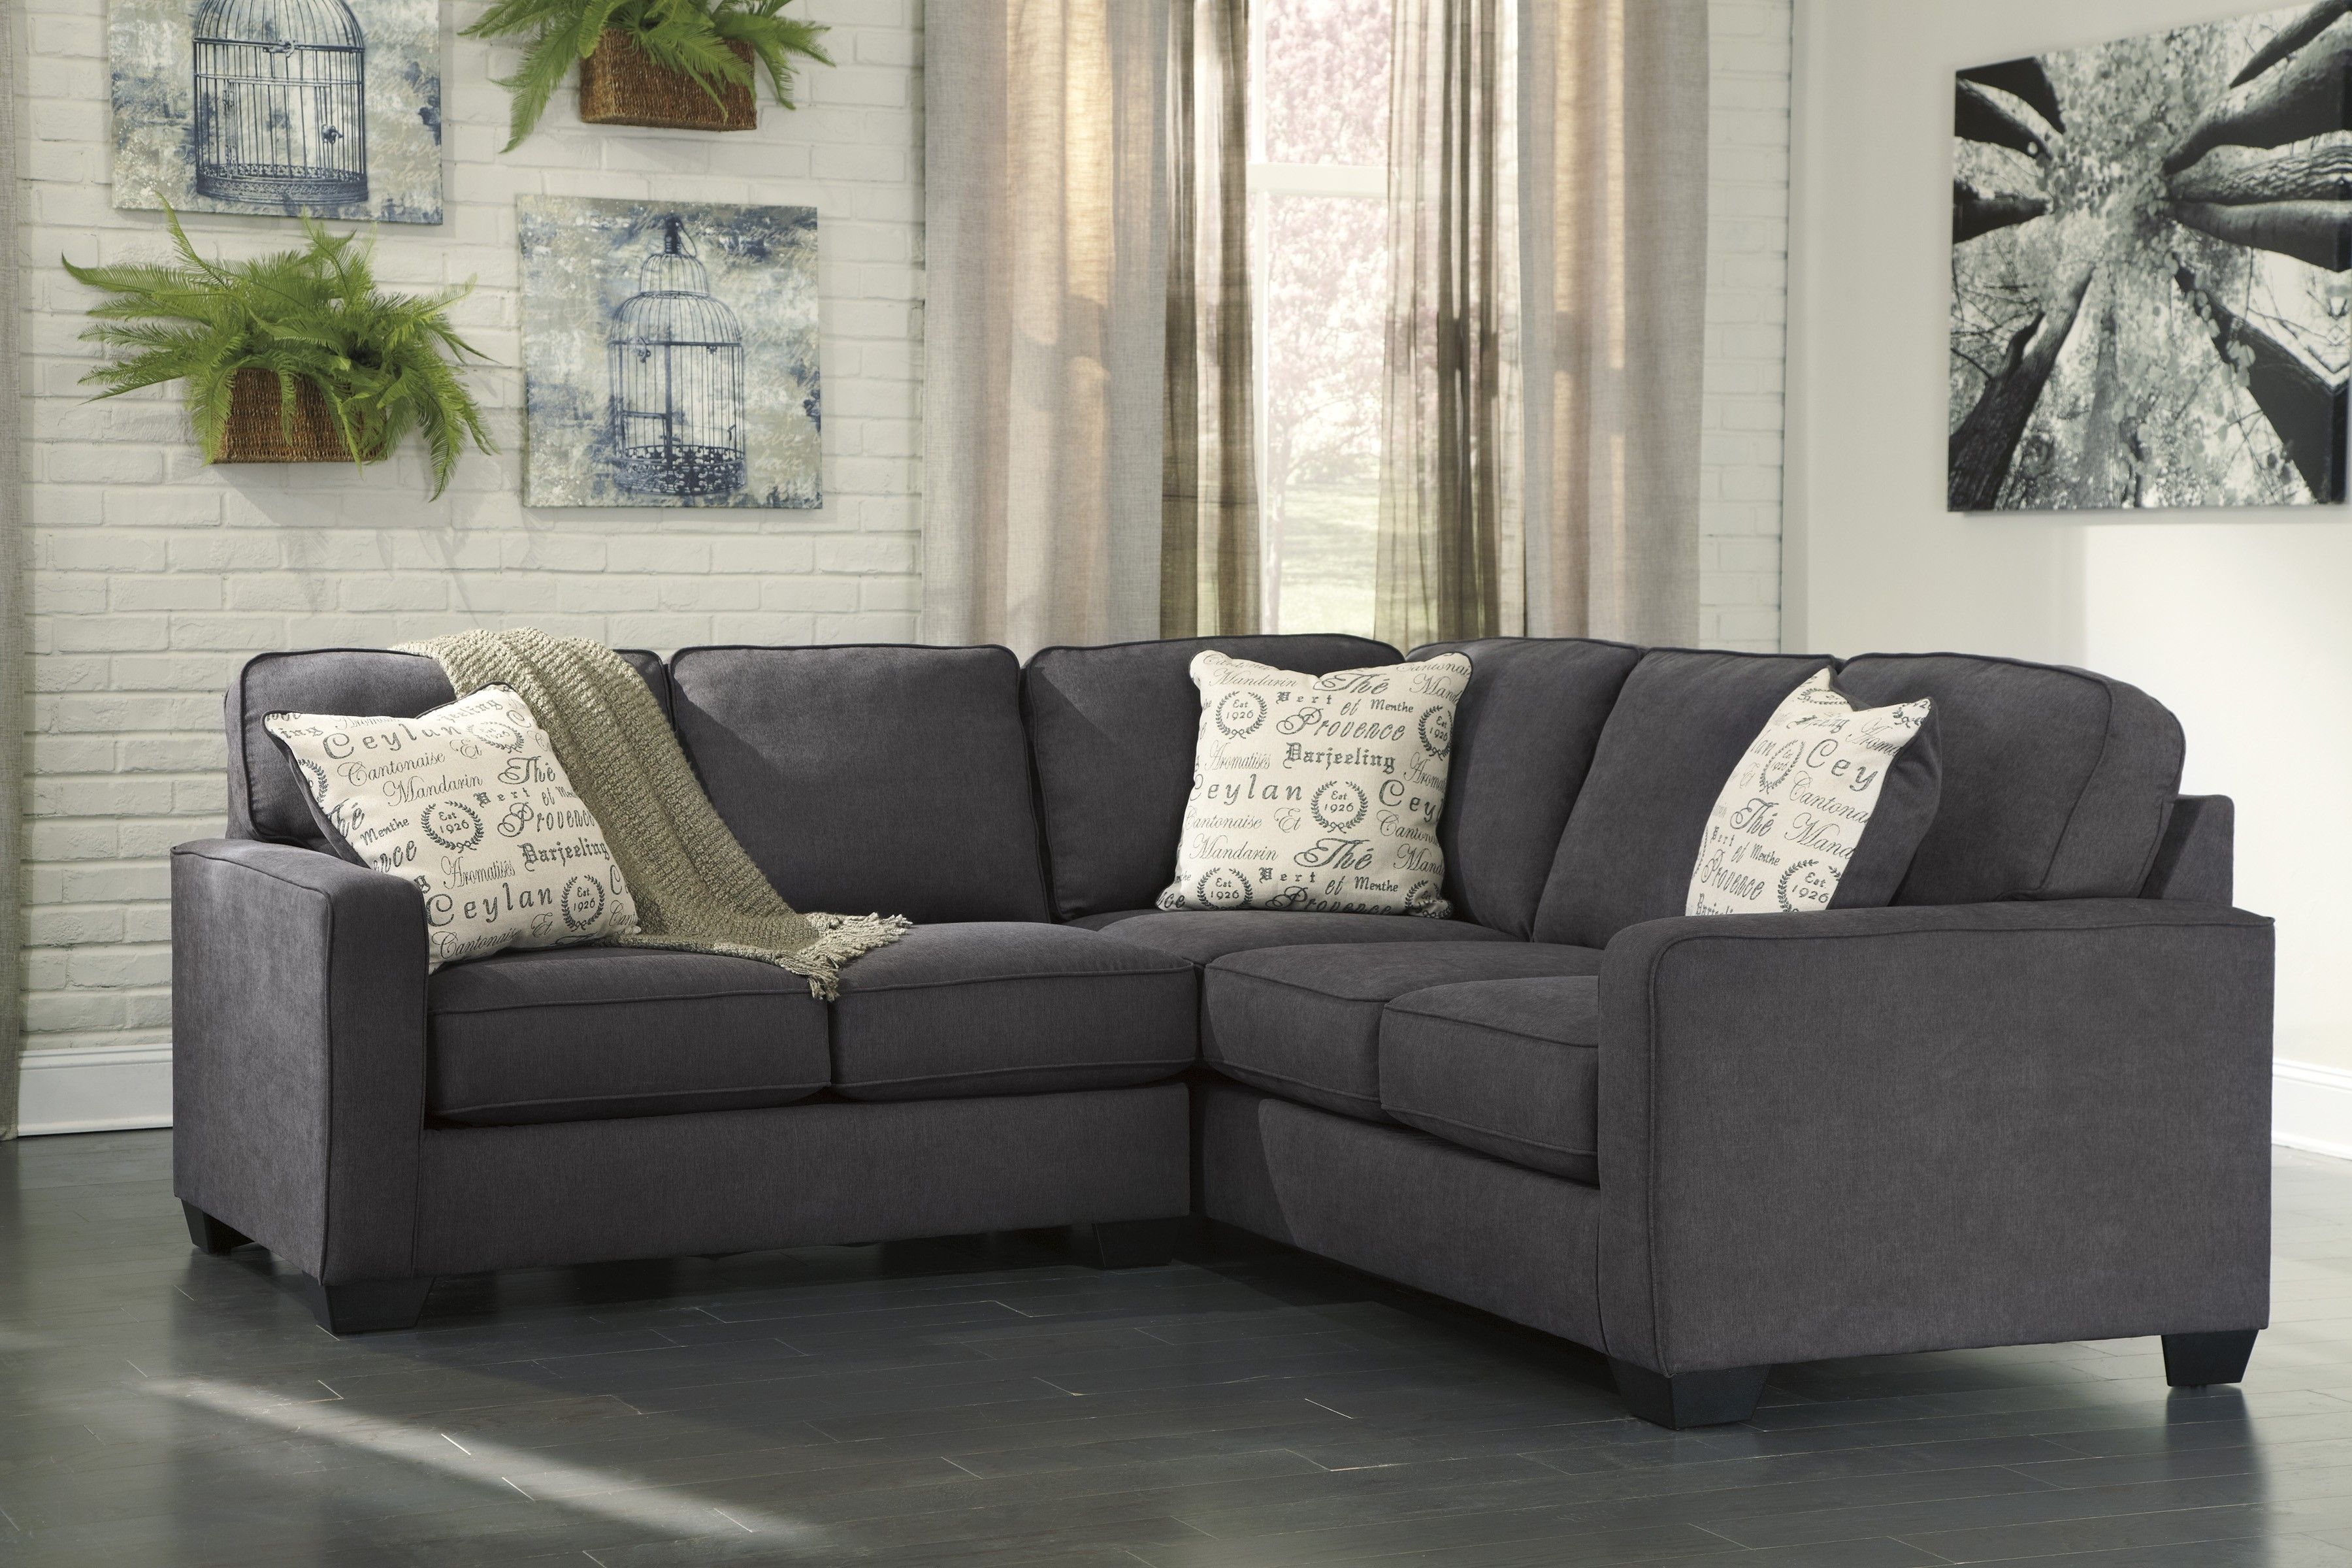 Alenya Charcoal 2 Piece Sectional Sofa For $625.00 – Furnitureusa For Elk Grove Ca Sectional Sofas (Photo 2 of 10)